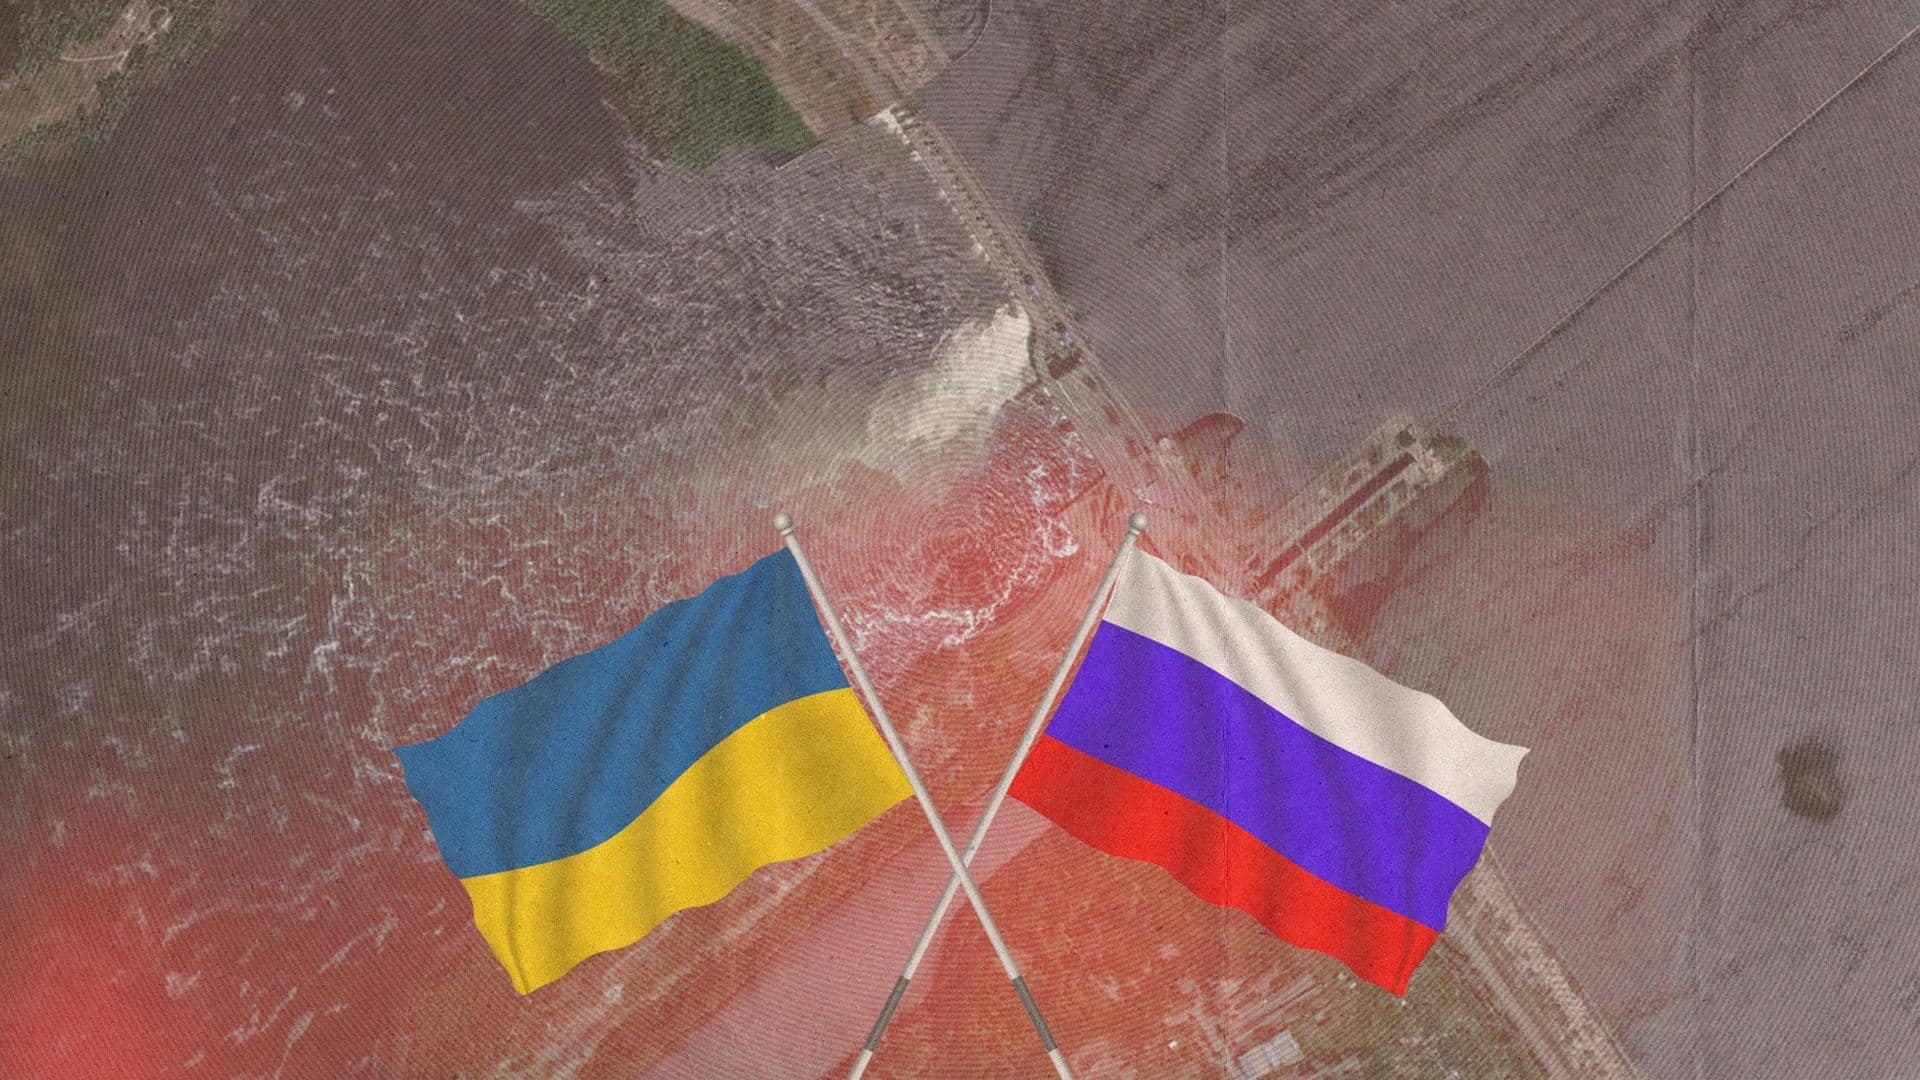 Ukraine accuses Russia of blowing up dam, fears massive flooding